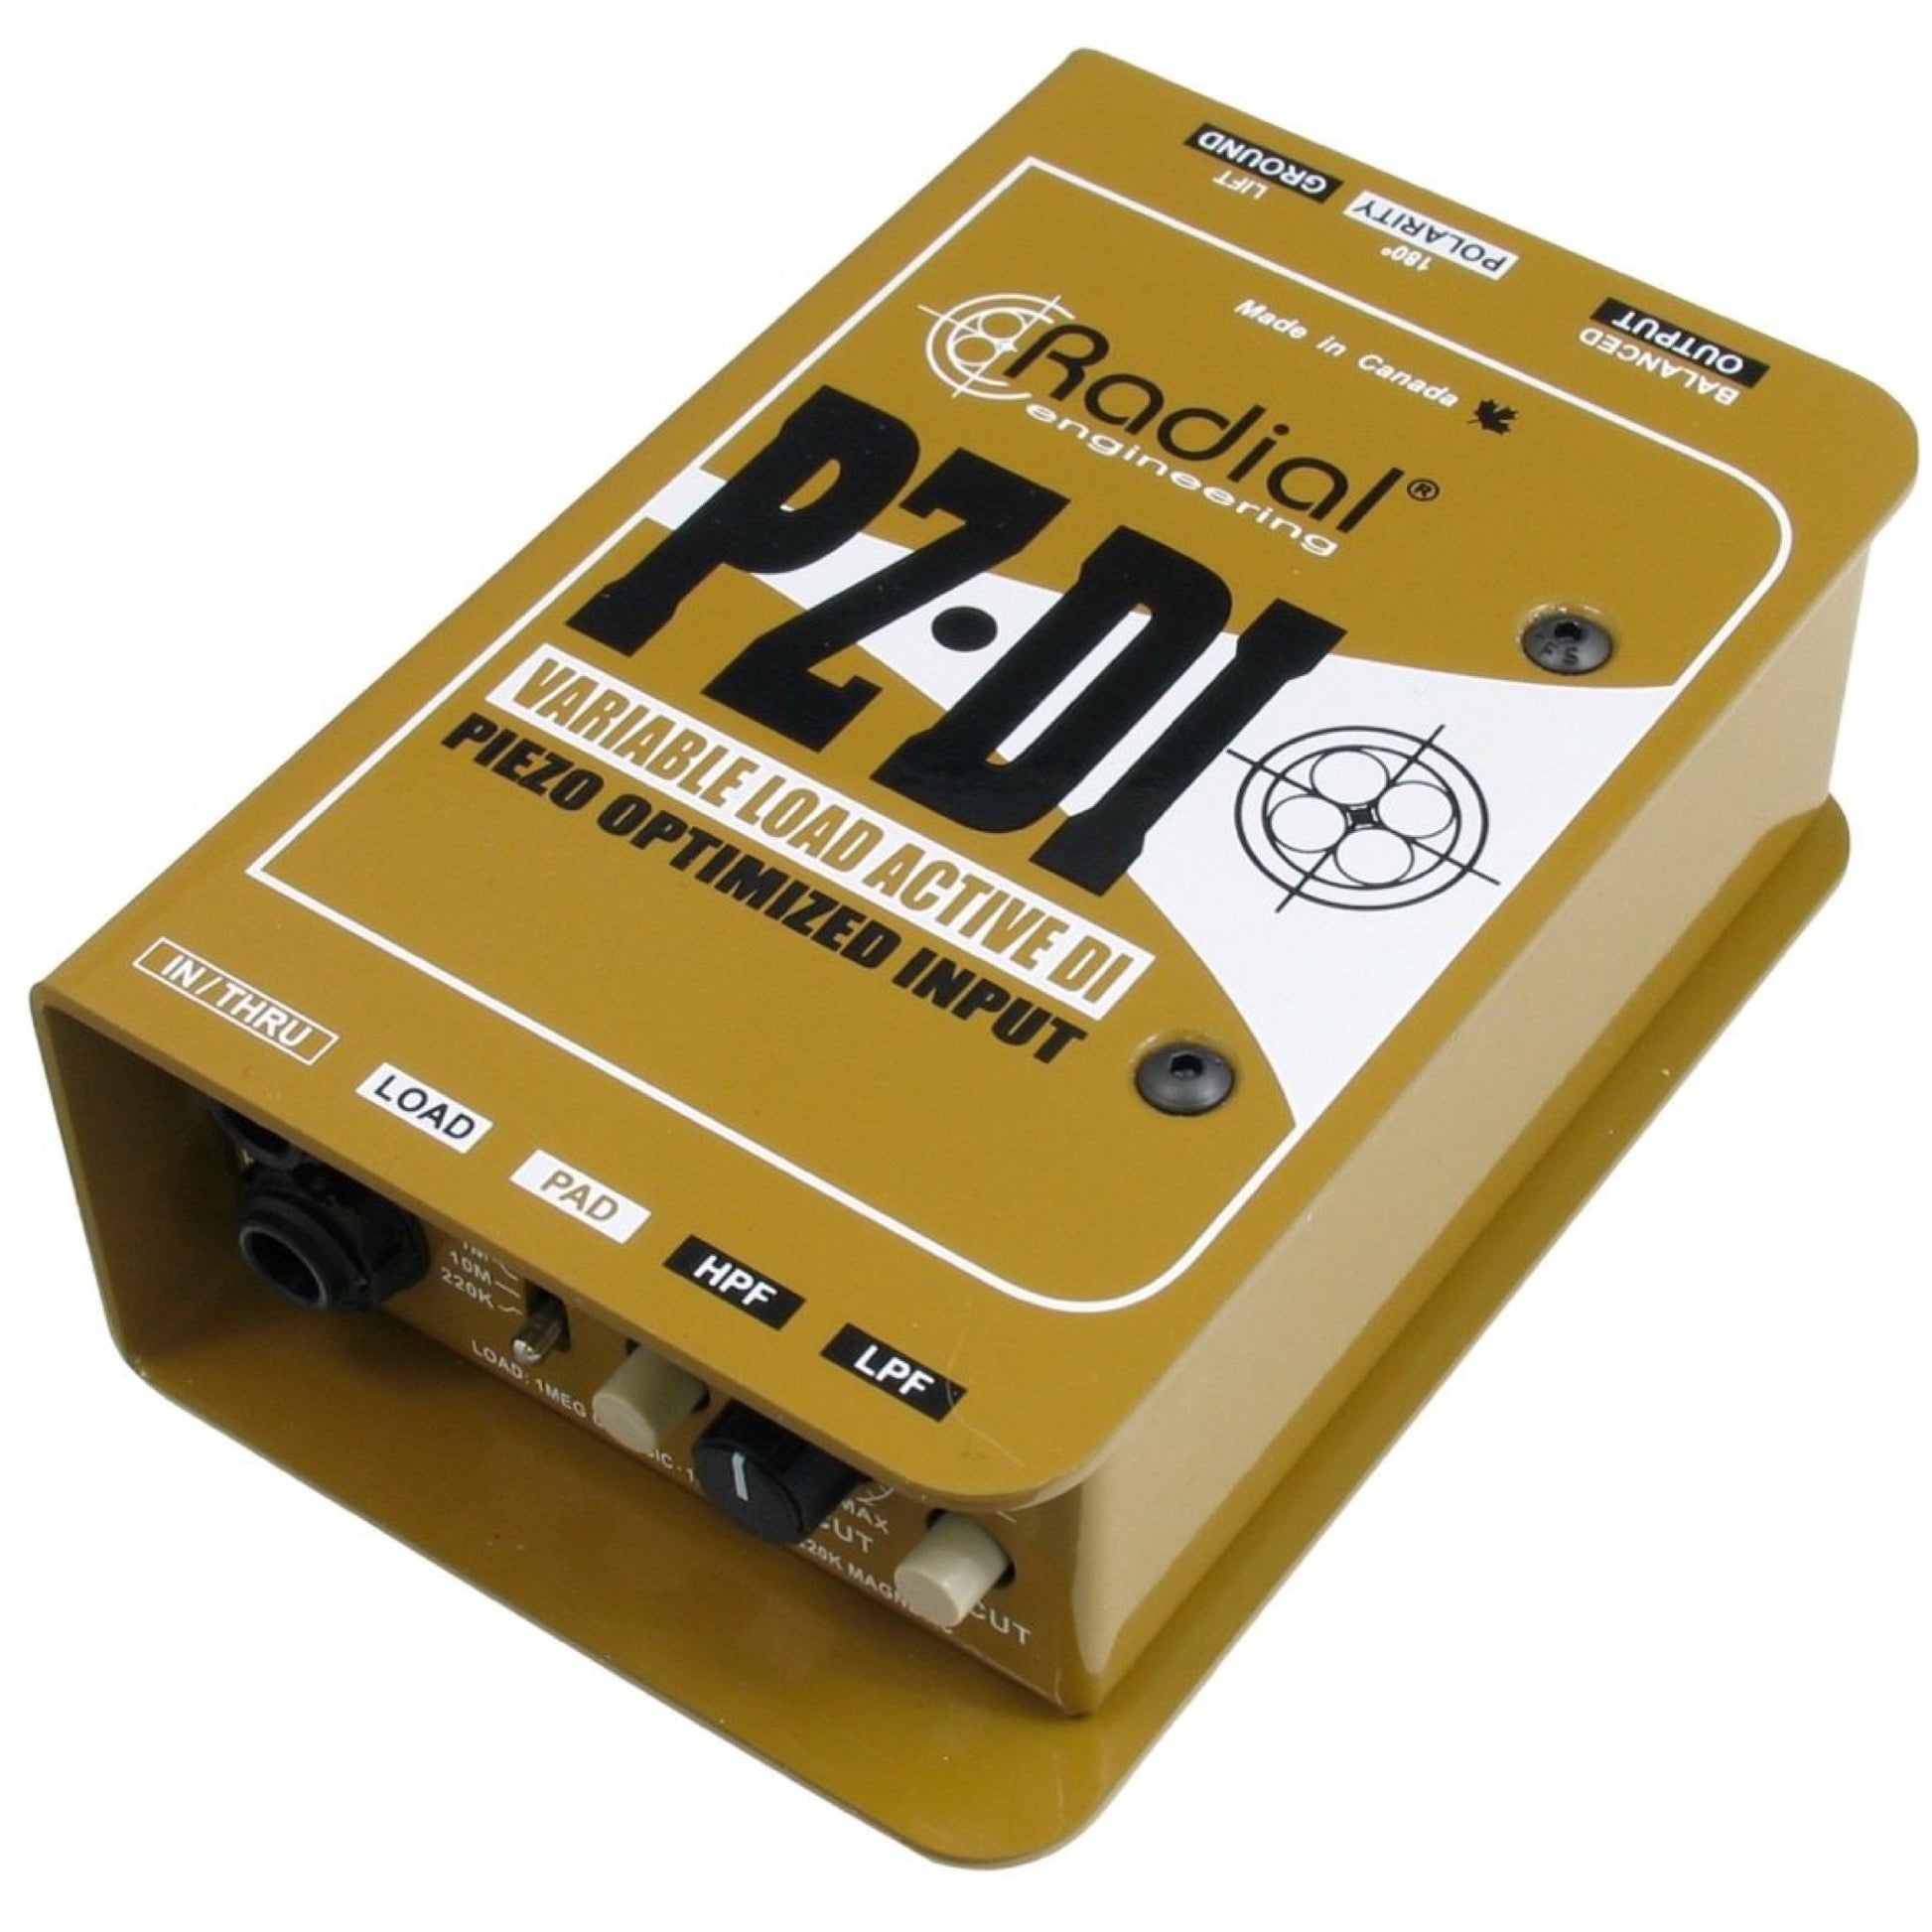 Radial PZDI Active DI Direct Box for Acoustic Instruments